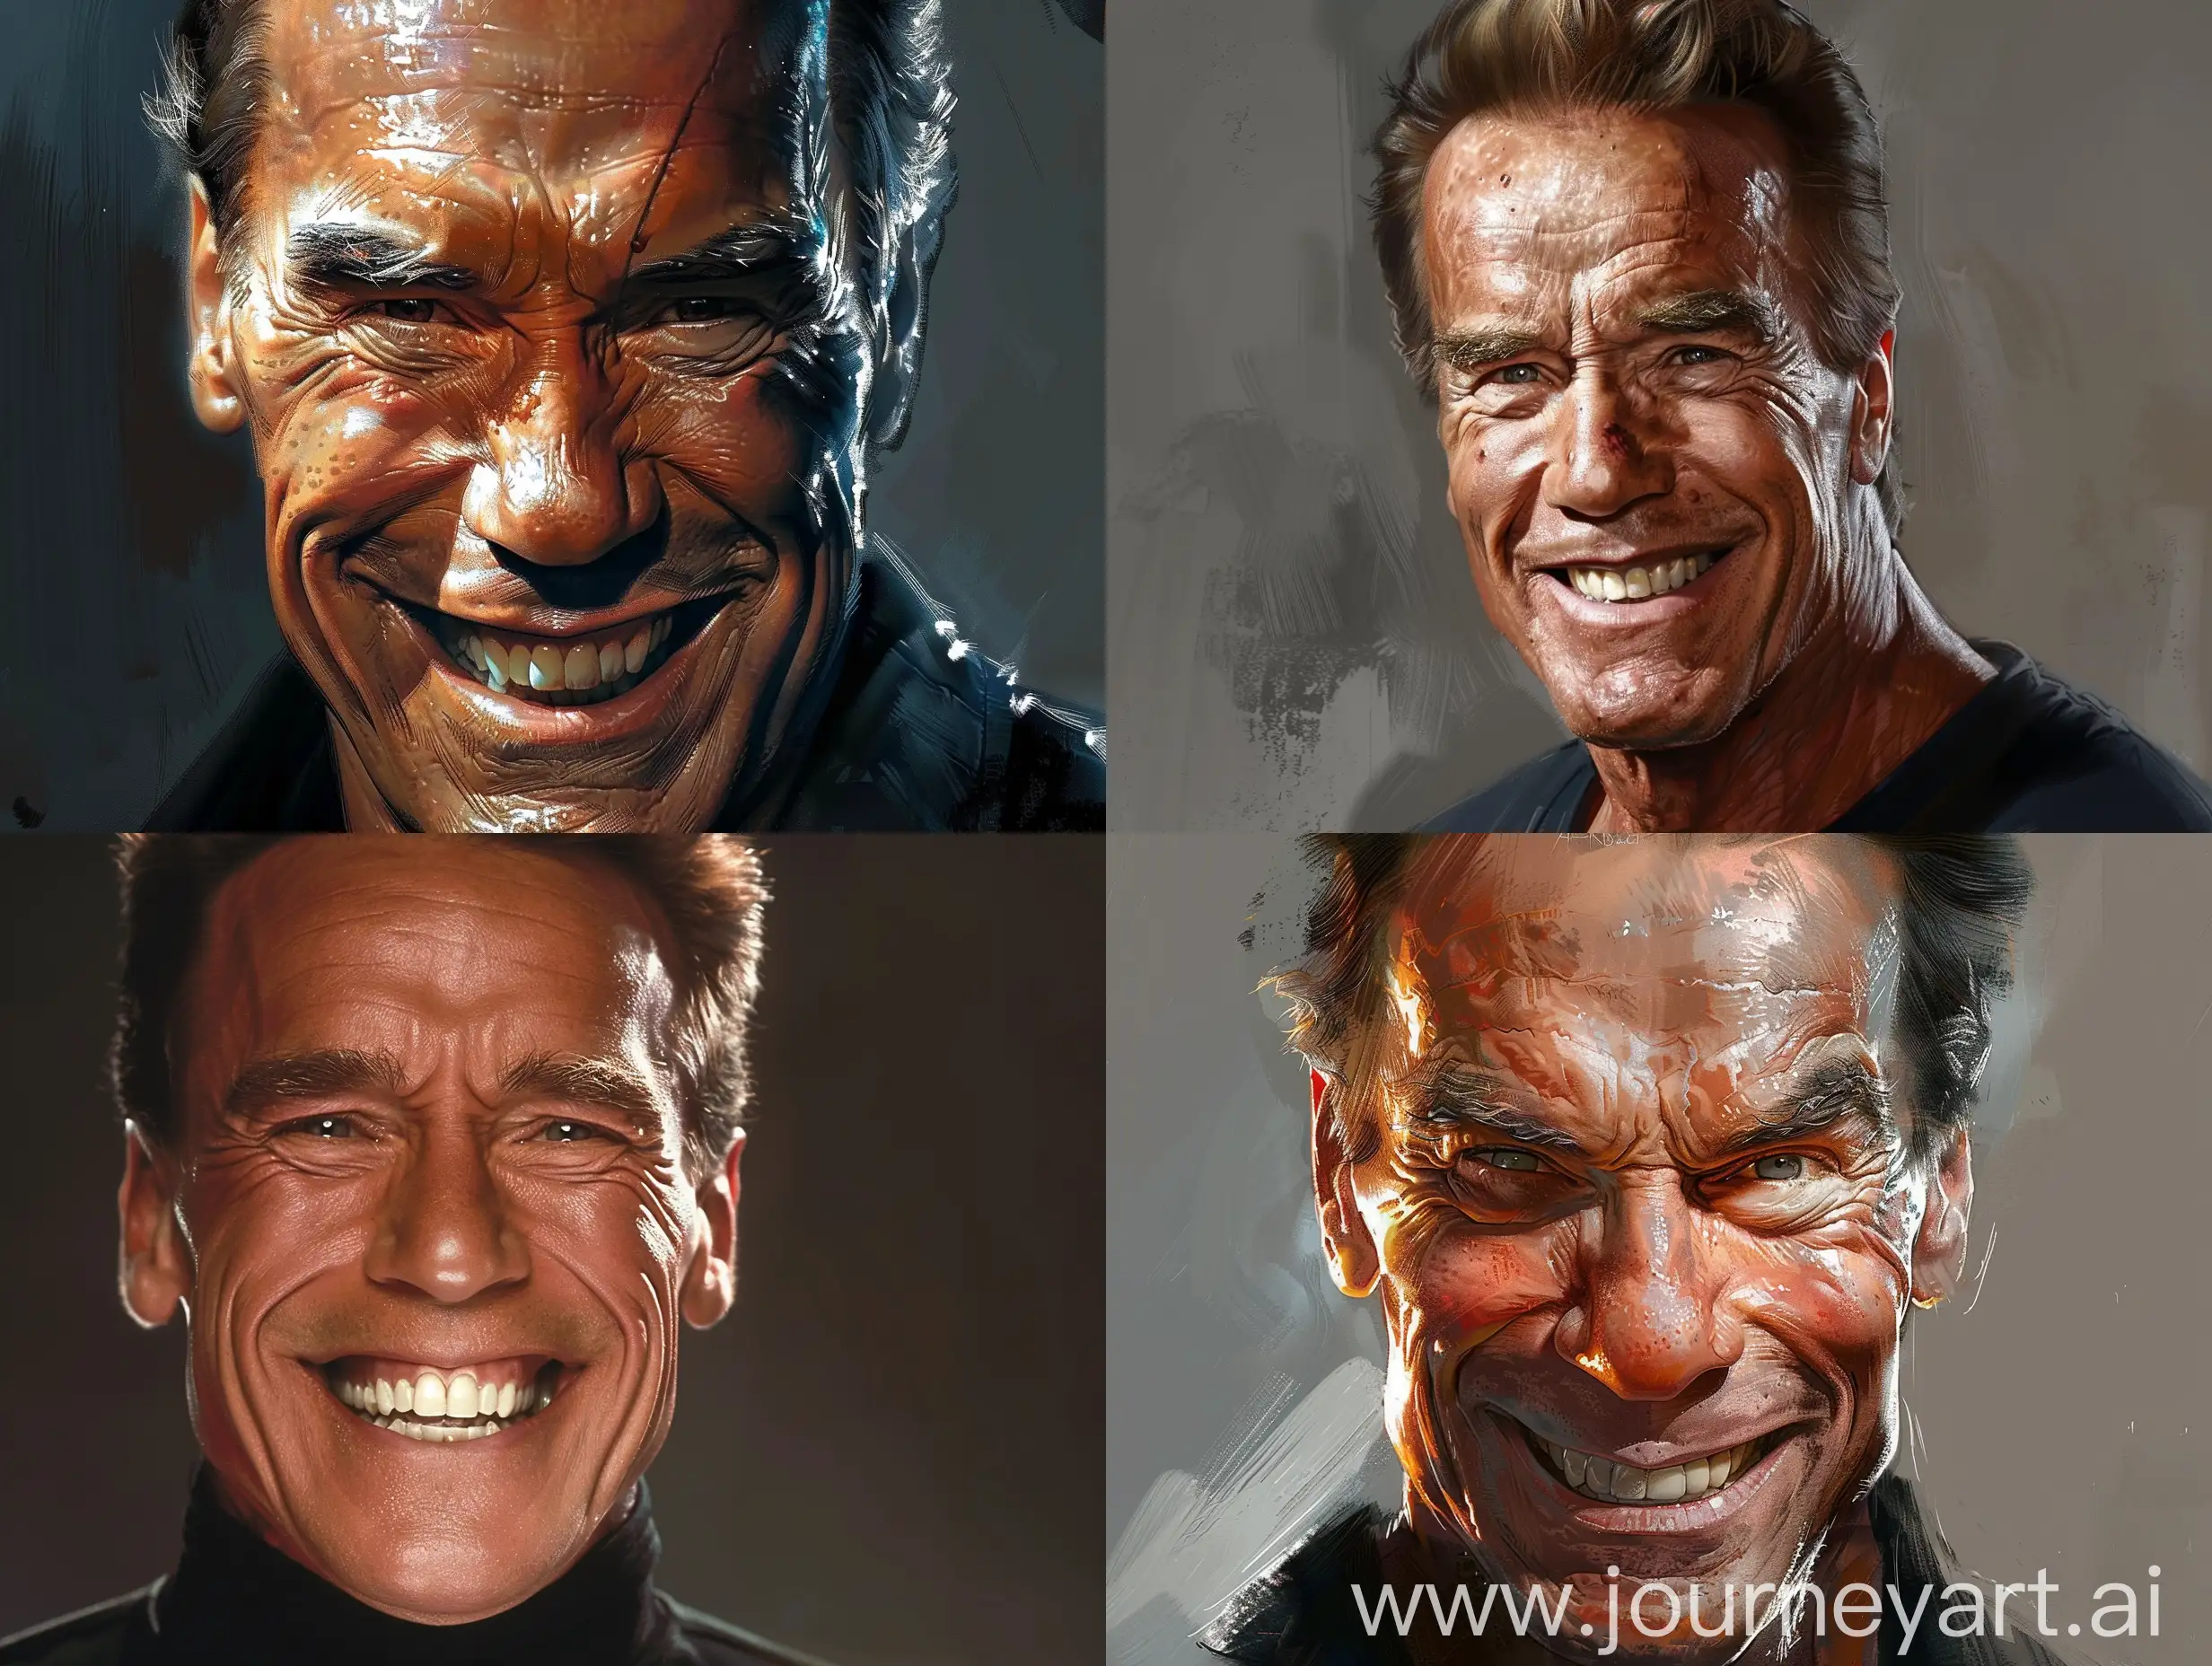 YouTube thumbnail depicting the concept "Dark Side of Being Famous: Arnold Schwarzenegger". The thumbnail should prominently feature Arnold Schwarzenegger with a villain smile. The image should be detailed and realistic, conveying the dual nature of fame and its potential darker aspects without any text overlaid on the thumbnail. The background should be neutral to emphasize Schwarzenegger's expression and the devilish features.